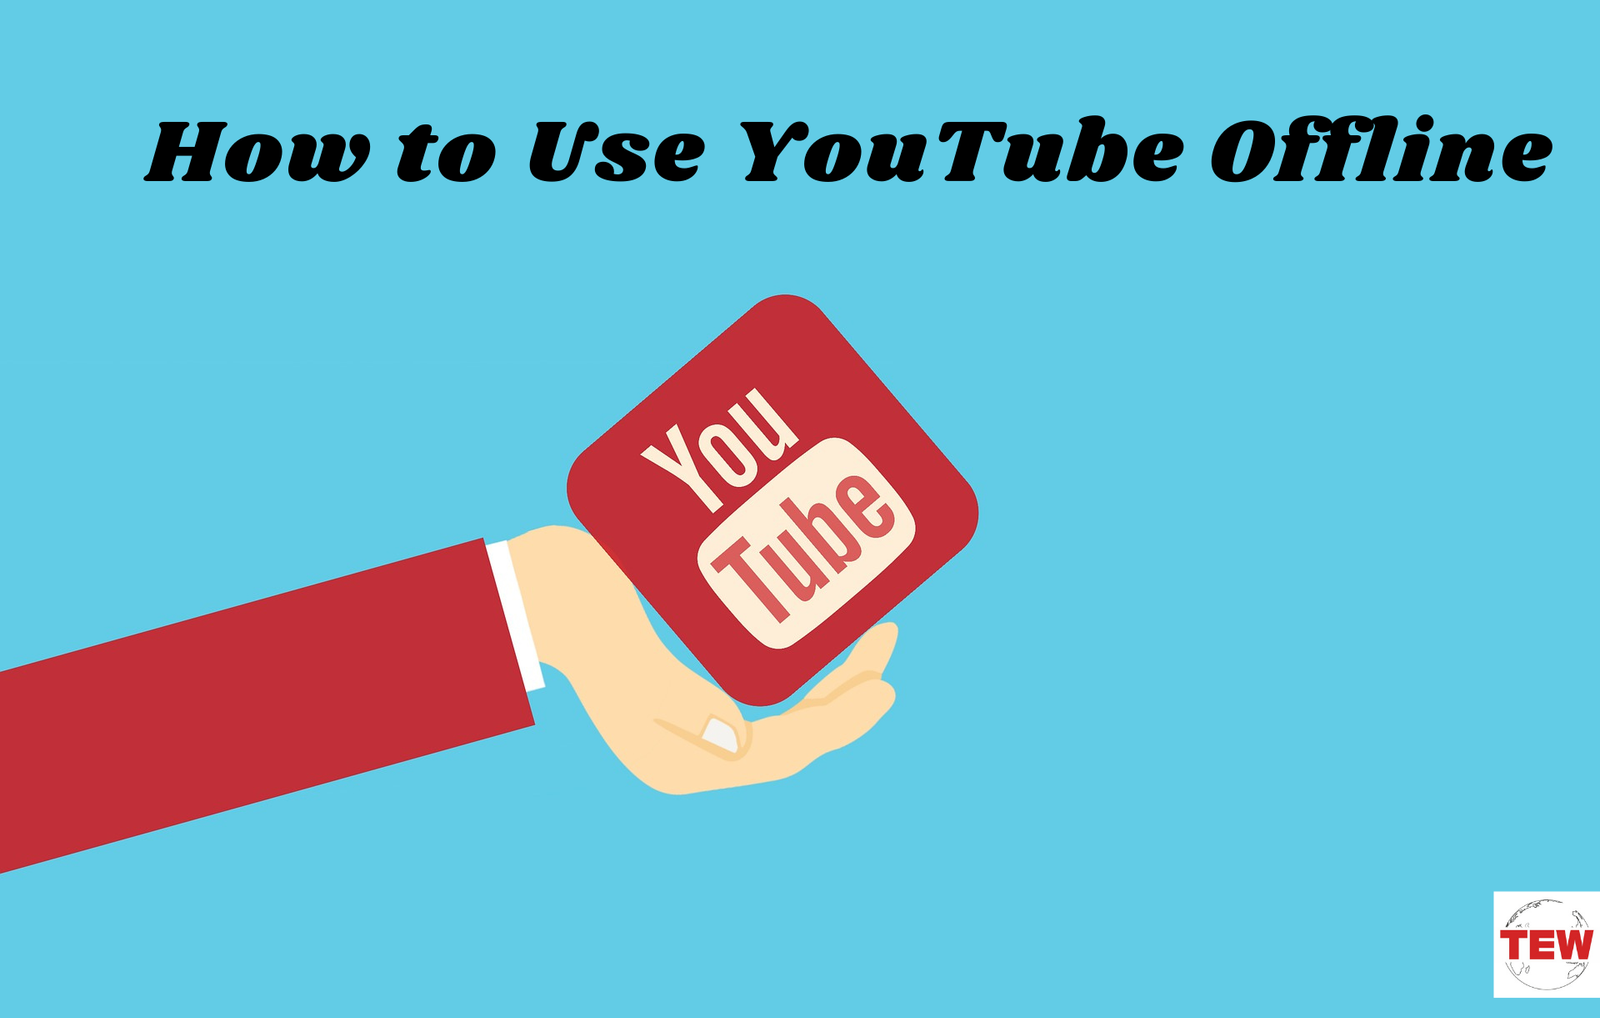 How to Use YouTube offline